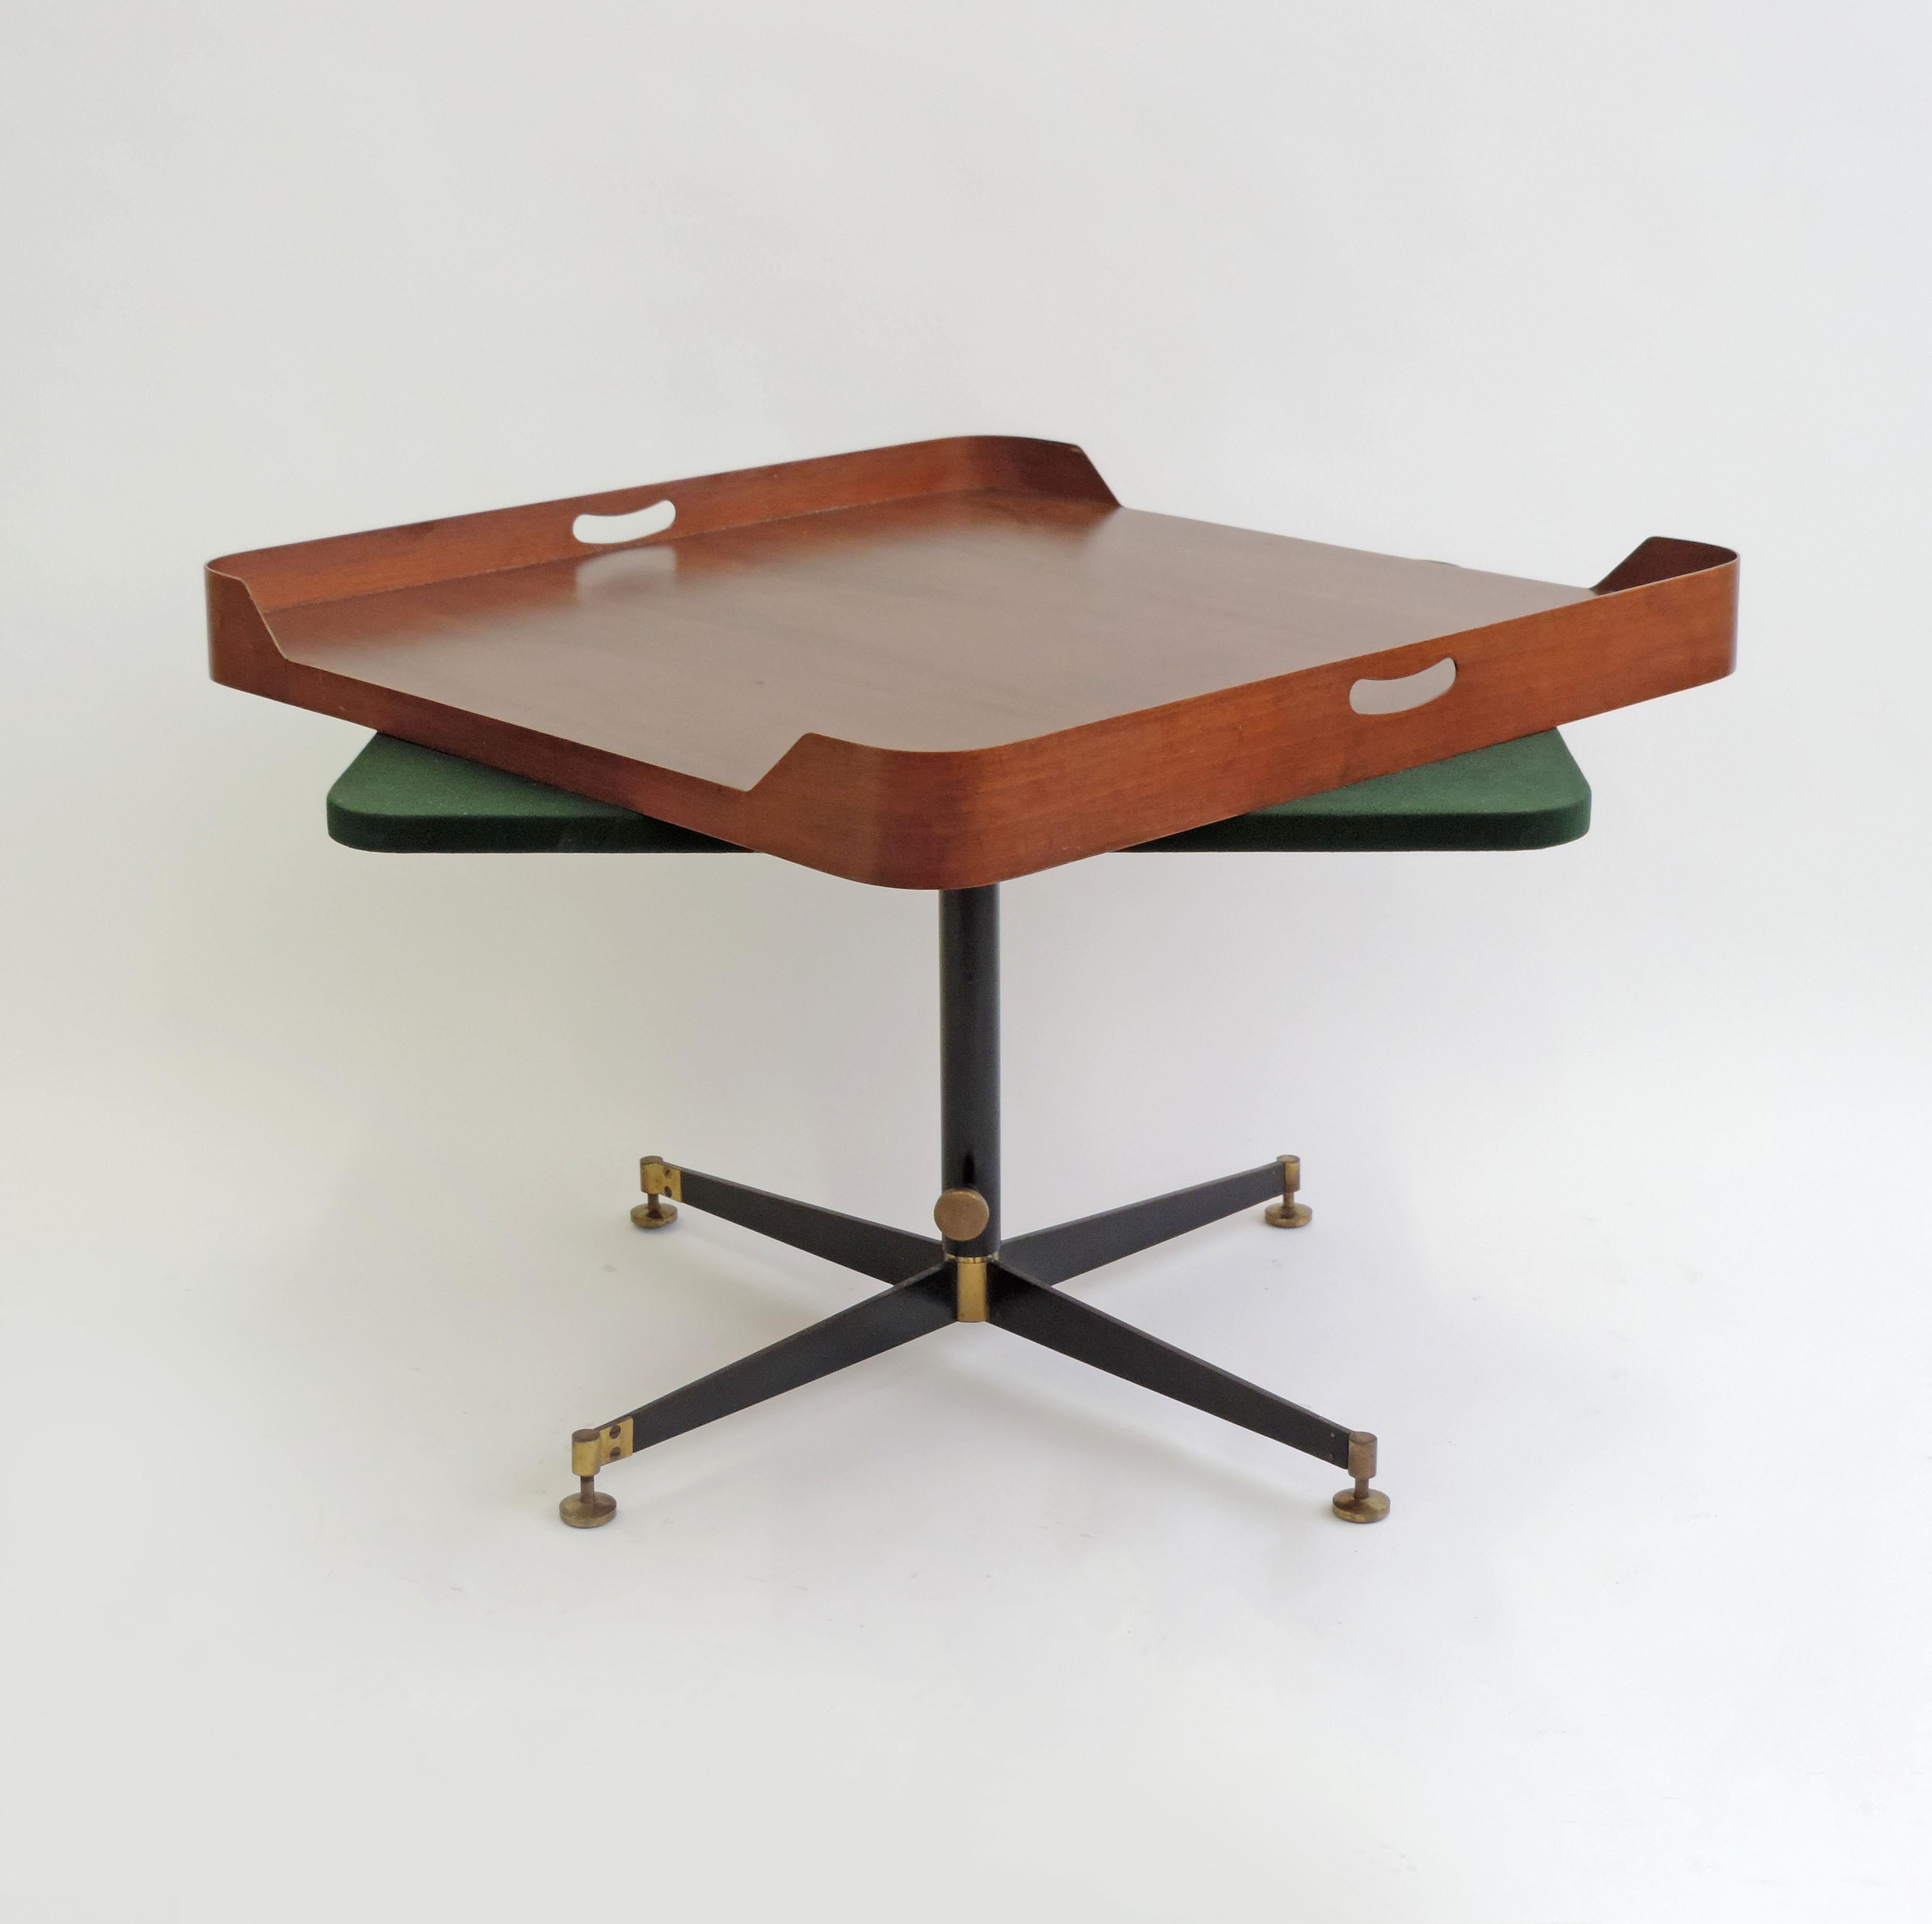 Rare Architect Ignazio Gardella 'T5' adjustable cocktail table for Azucena, Italy 1949.

The table has a removable tray top concealing a felted surface below and an adjustable base that extends in height for use as either a coffee table or game